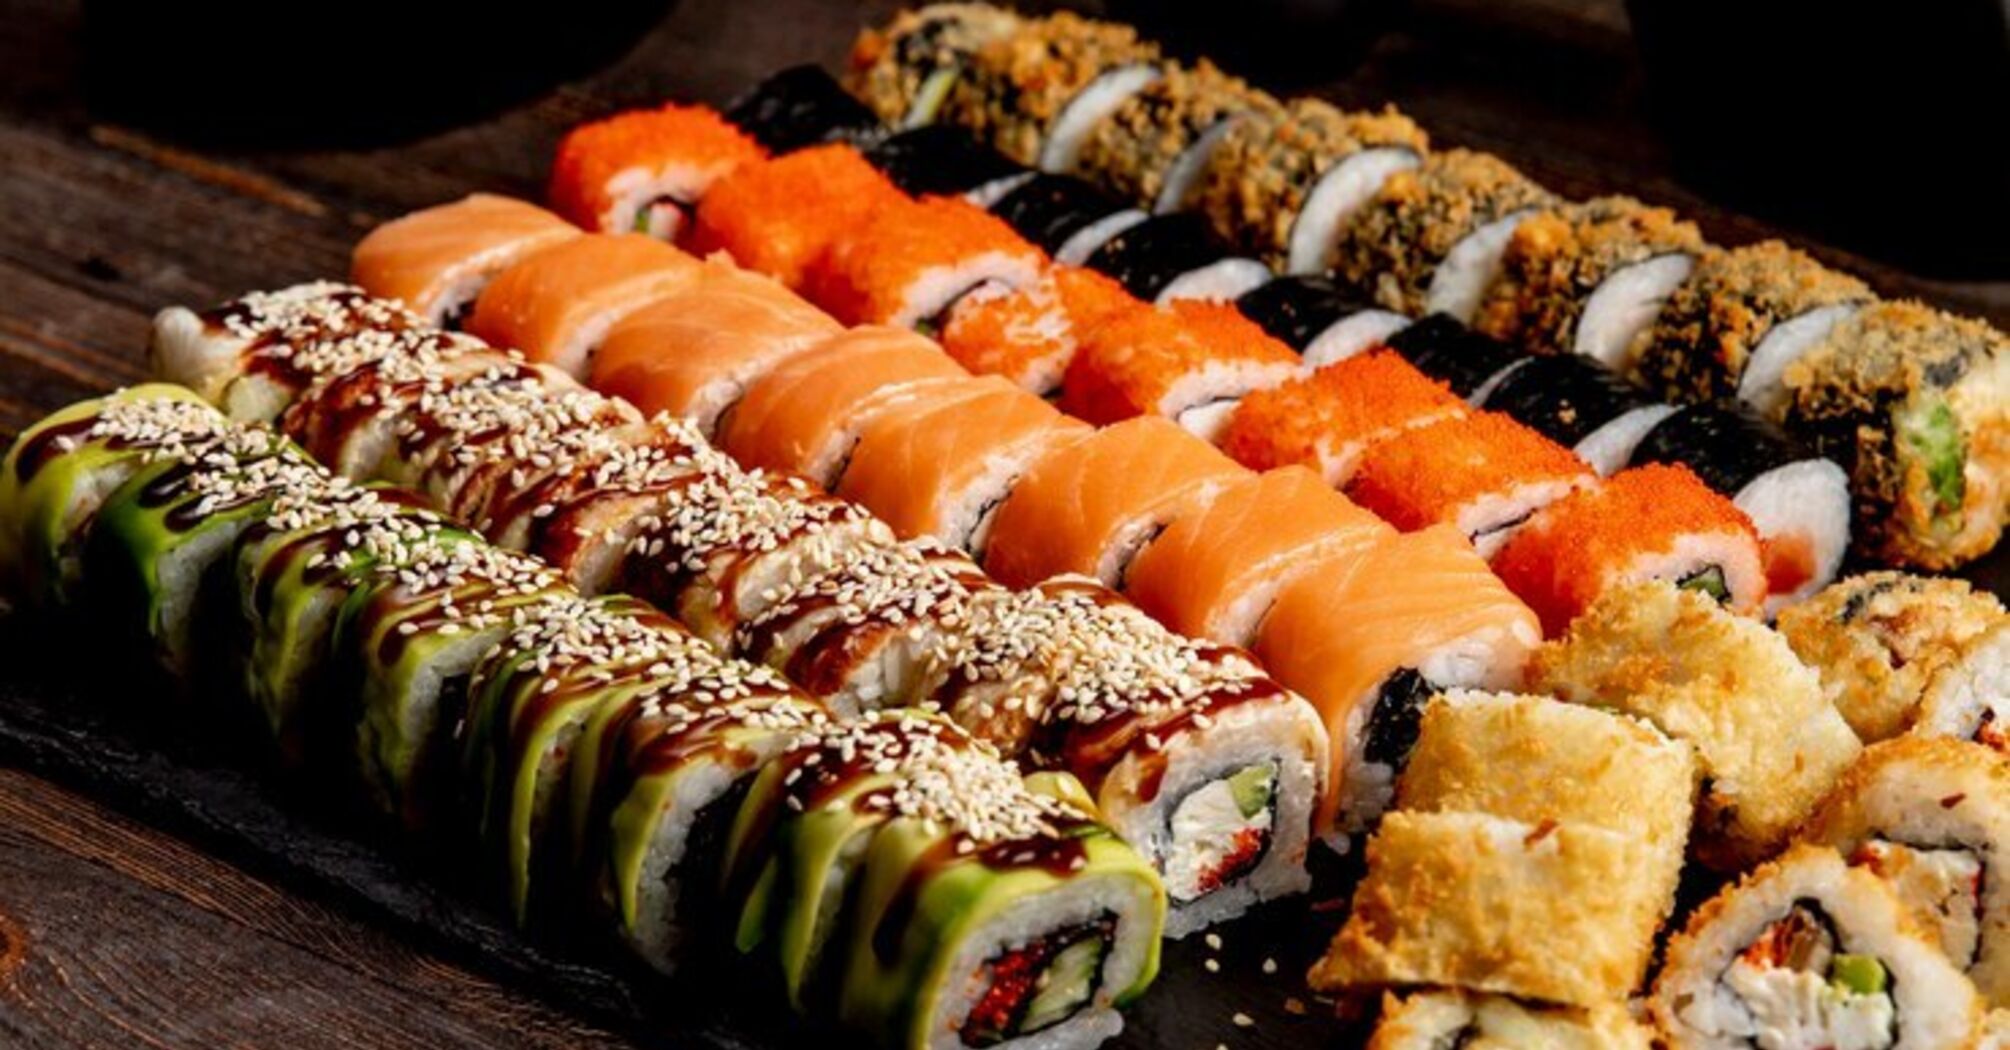 Six out of the 10 most expensive restaurants in the world serve sushi